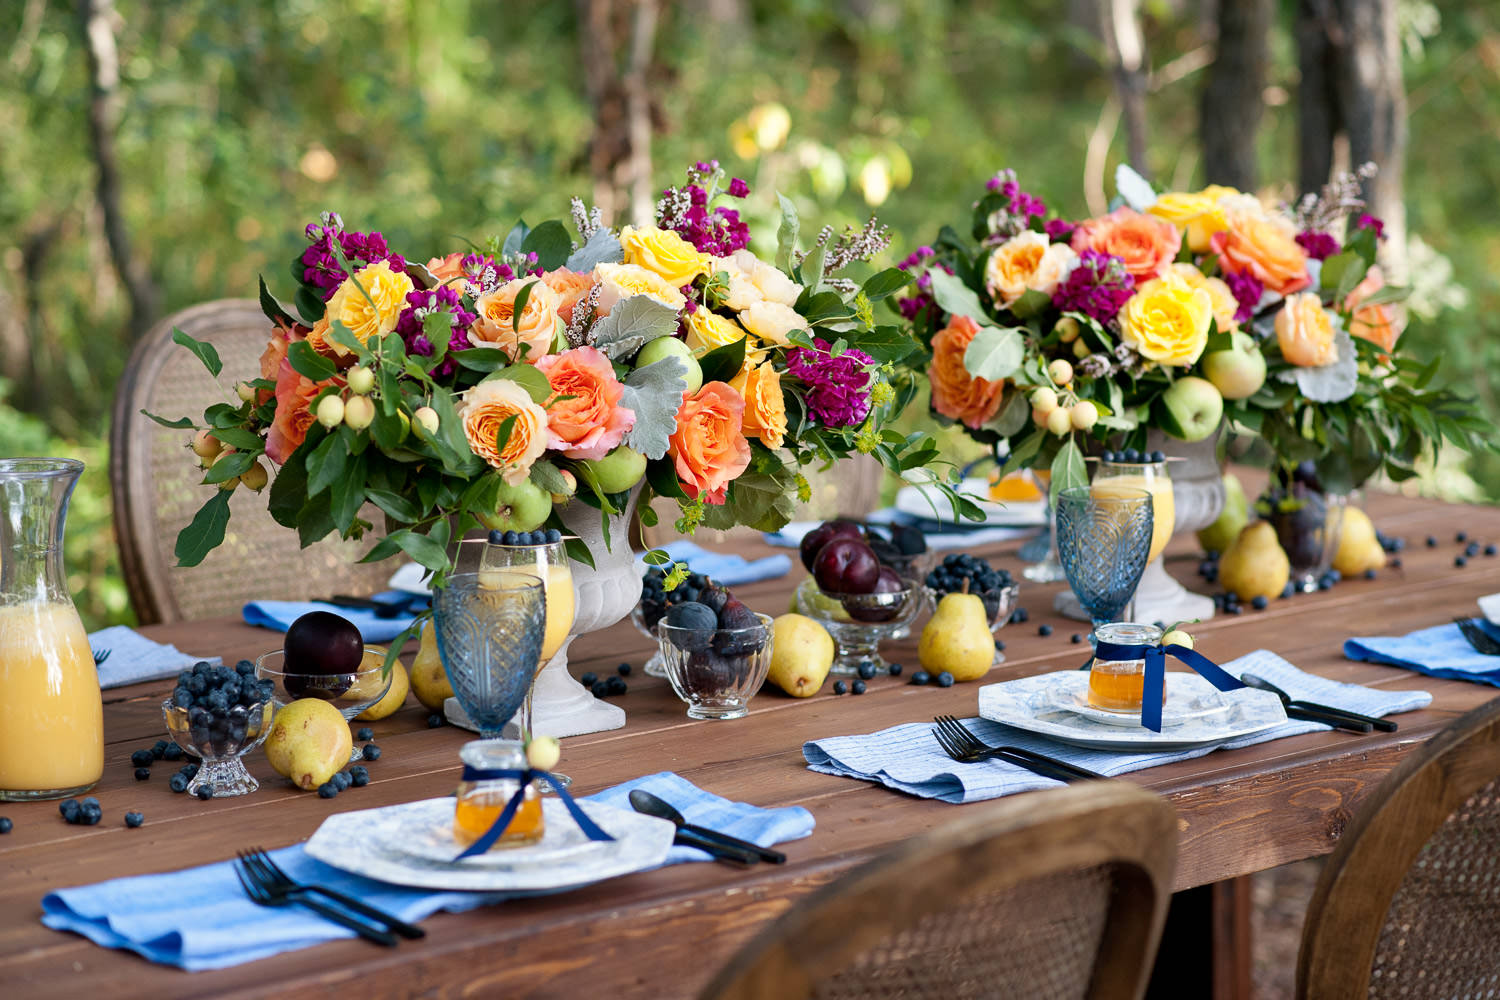 harvest table dressed with flowers and fruit captured by Tara Whittaker Photography